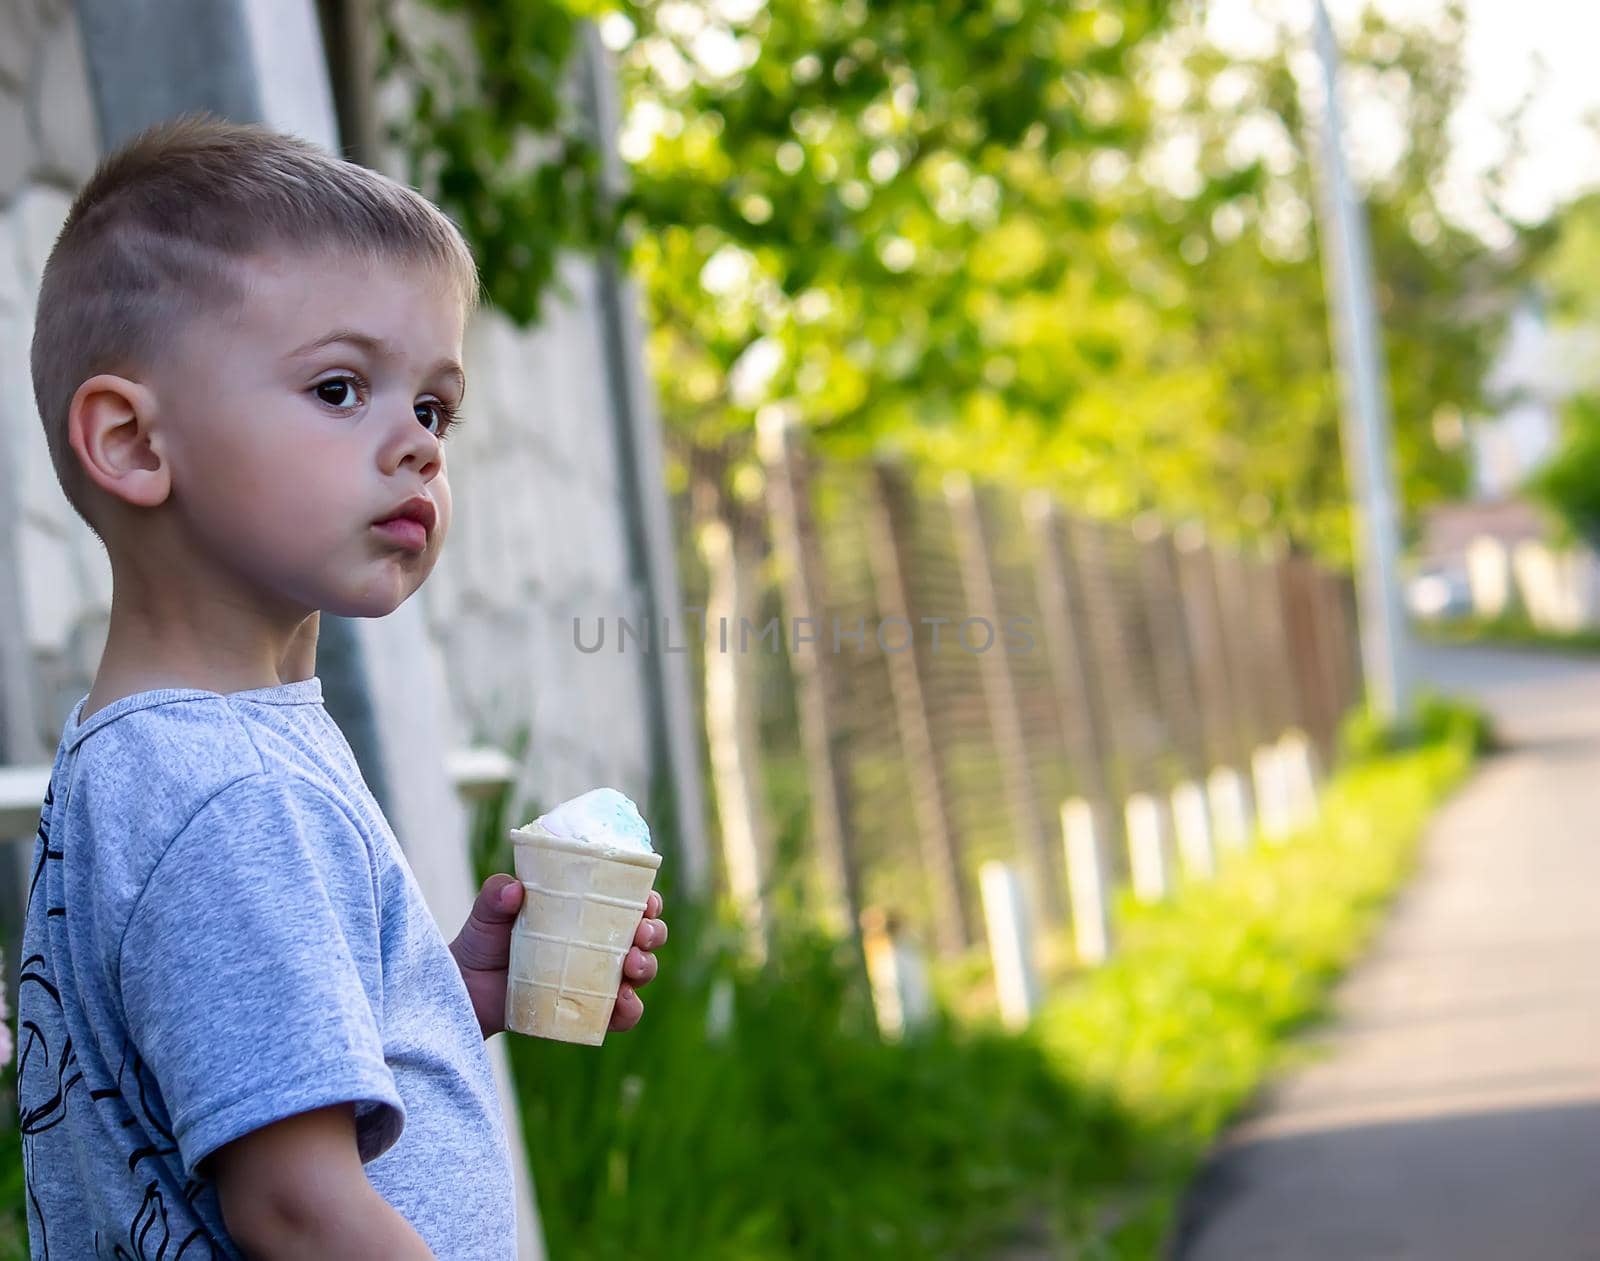 child eats ice cream in nature, ice cream in a cup. Nature. Selective focus